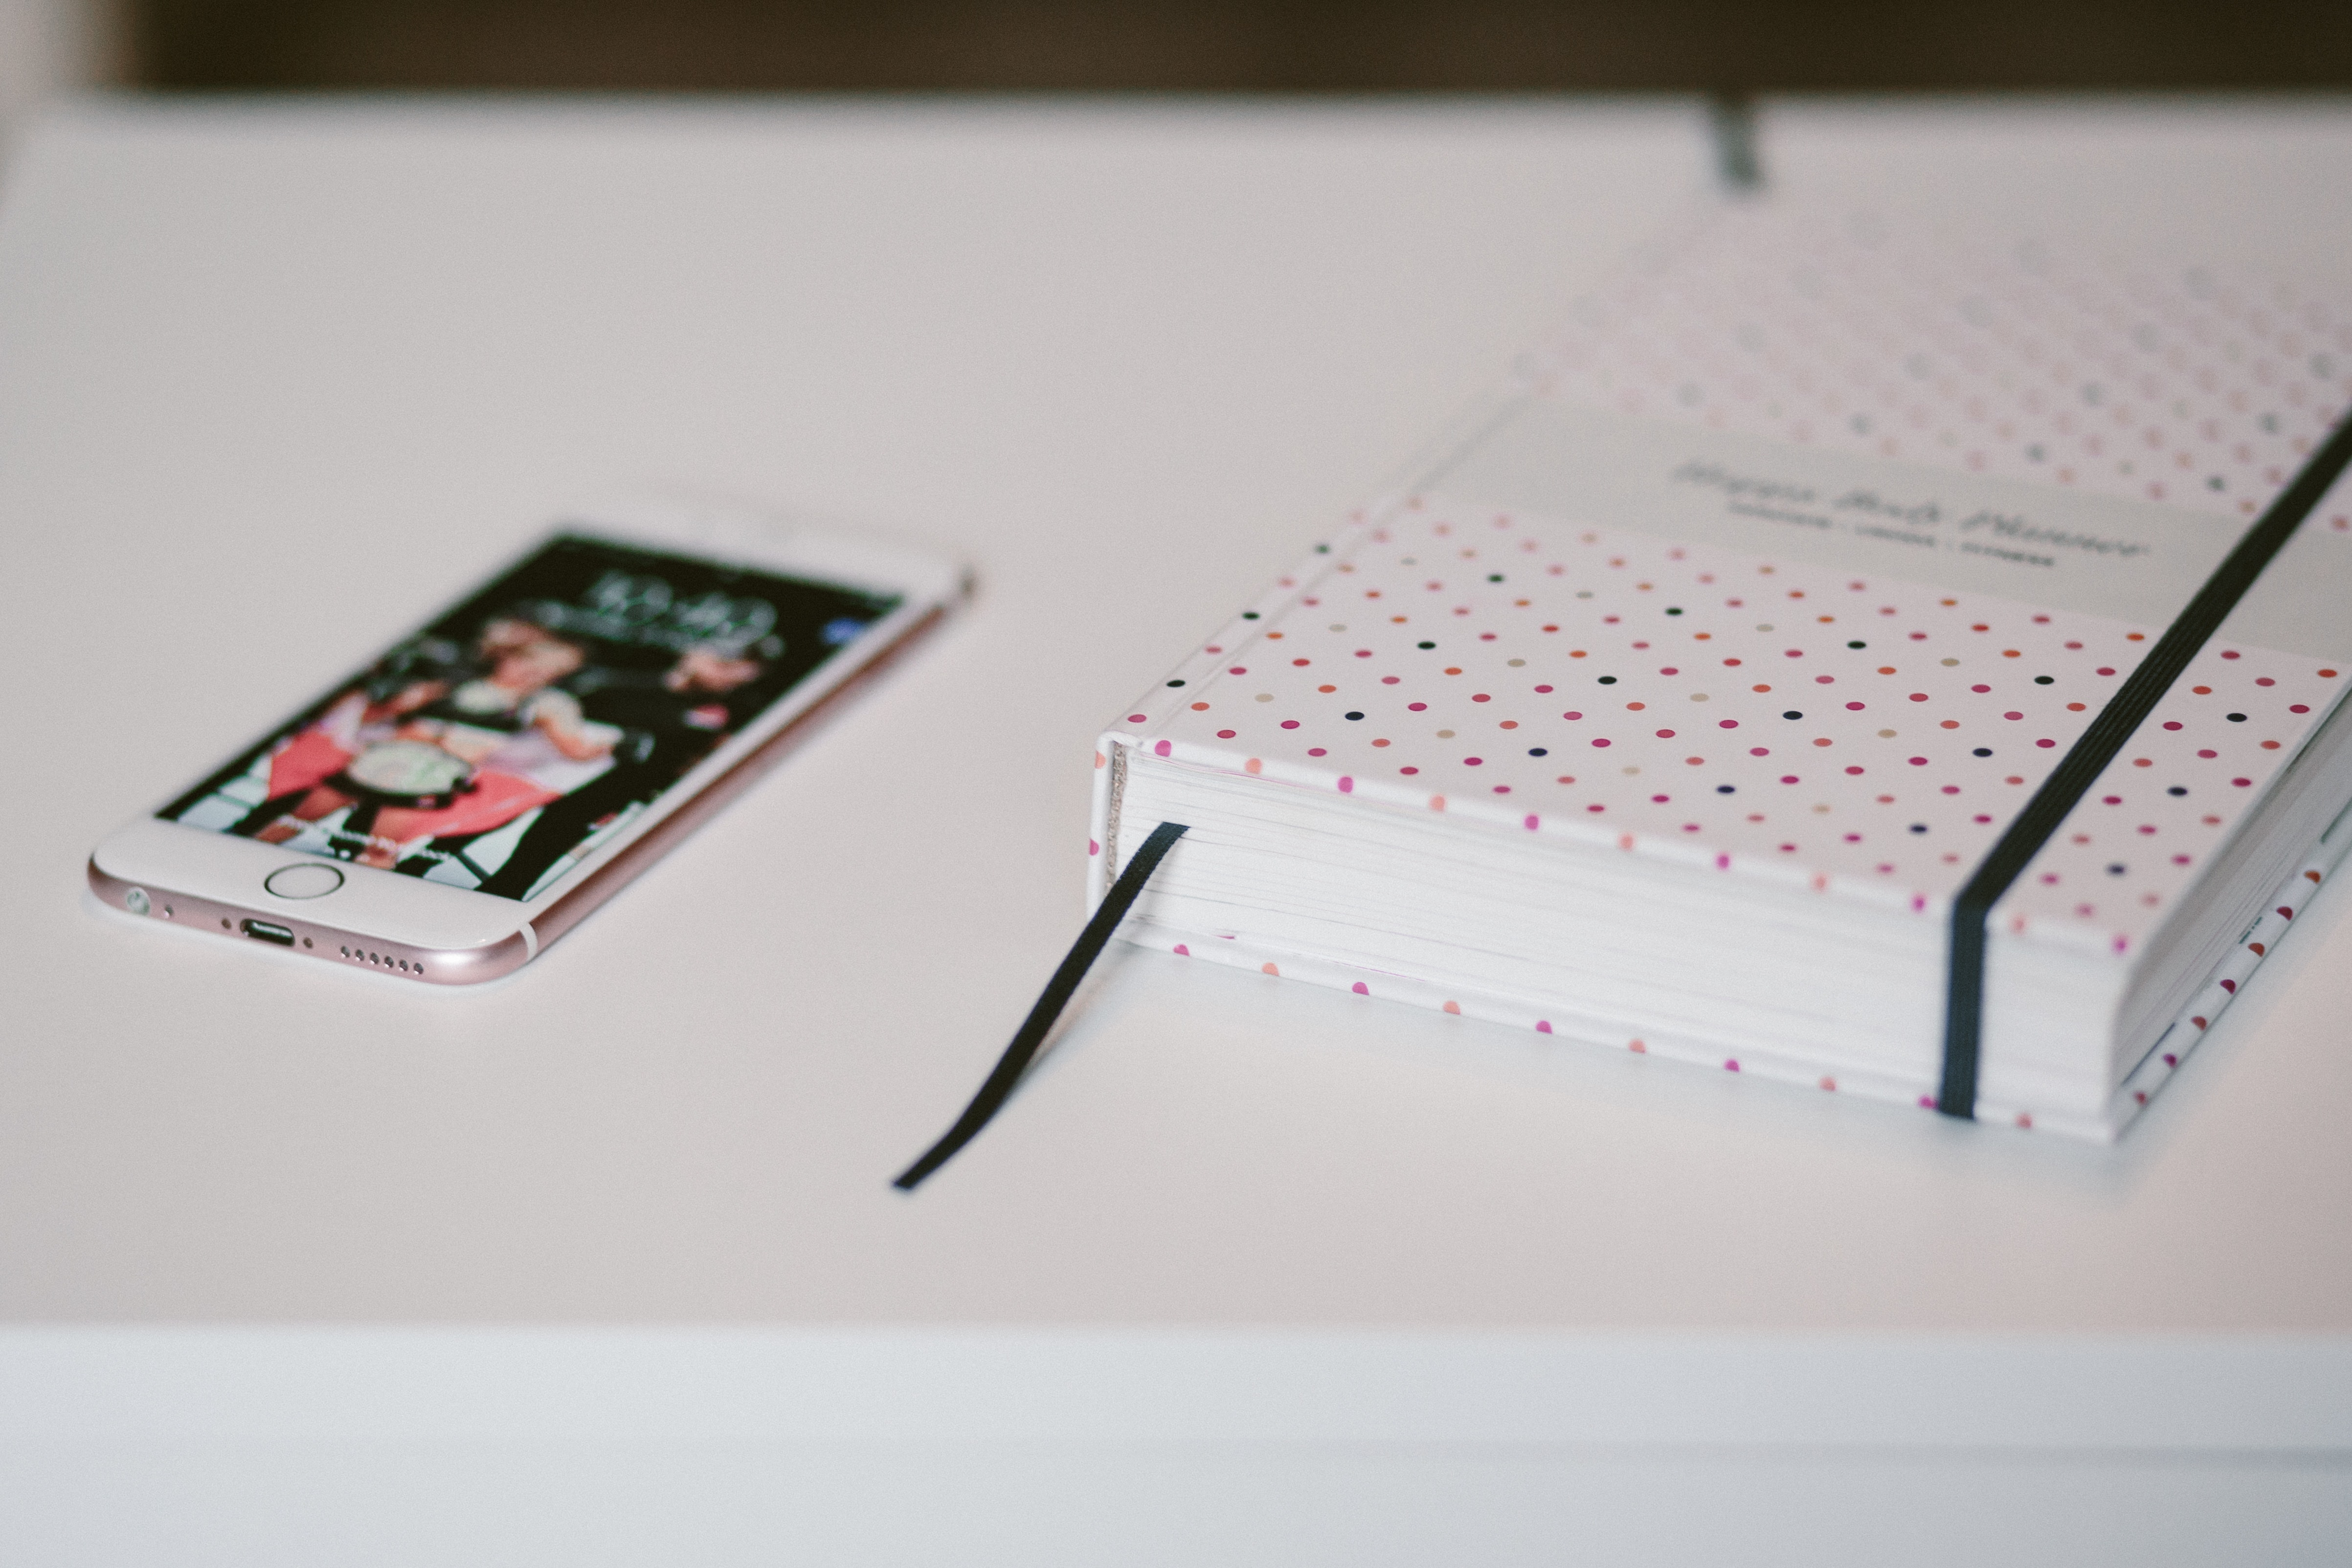 Rose gold iphone 6s beside white and black polka dots book both on top of white wooden table photo